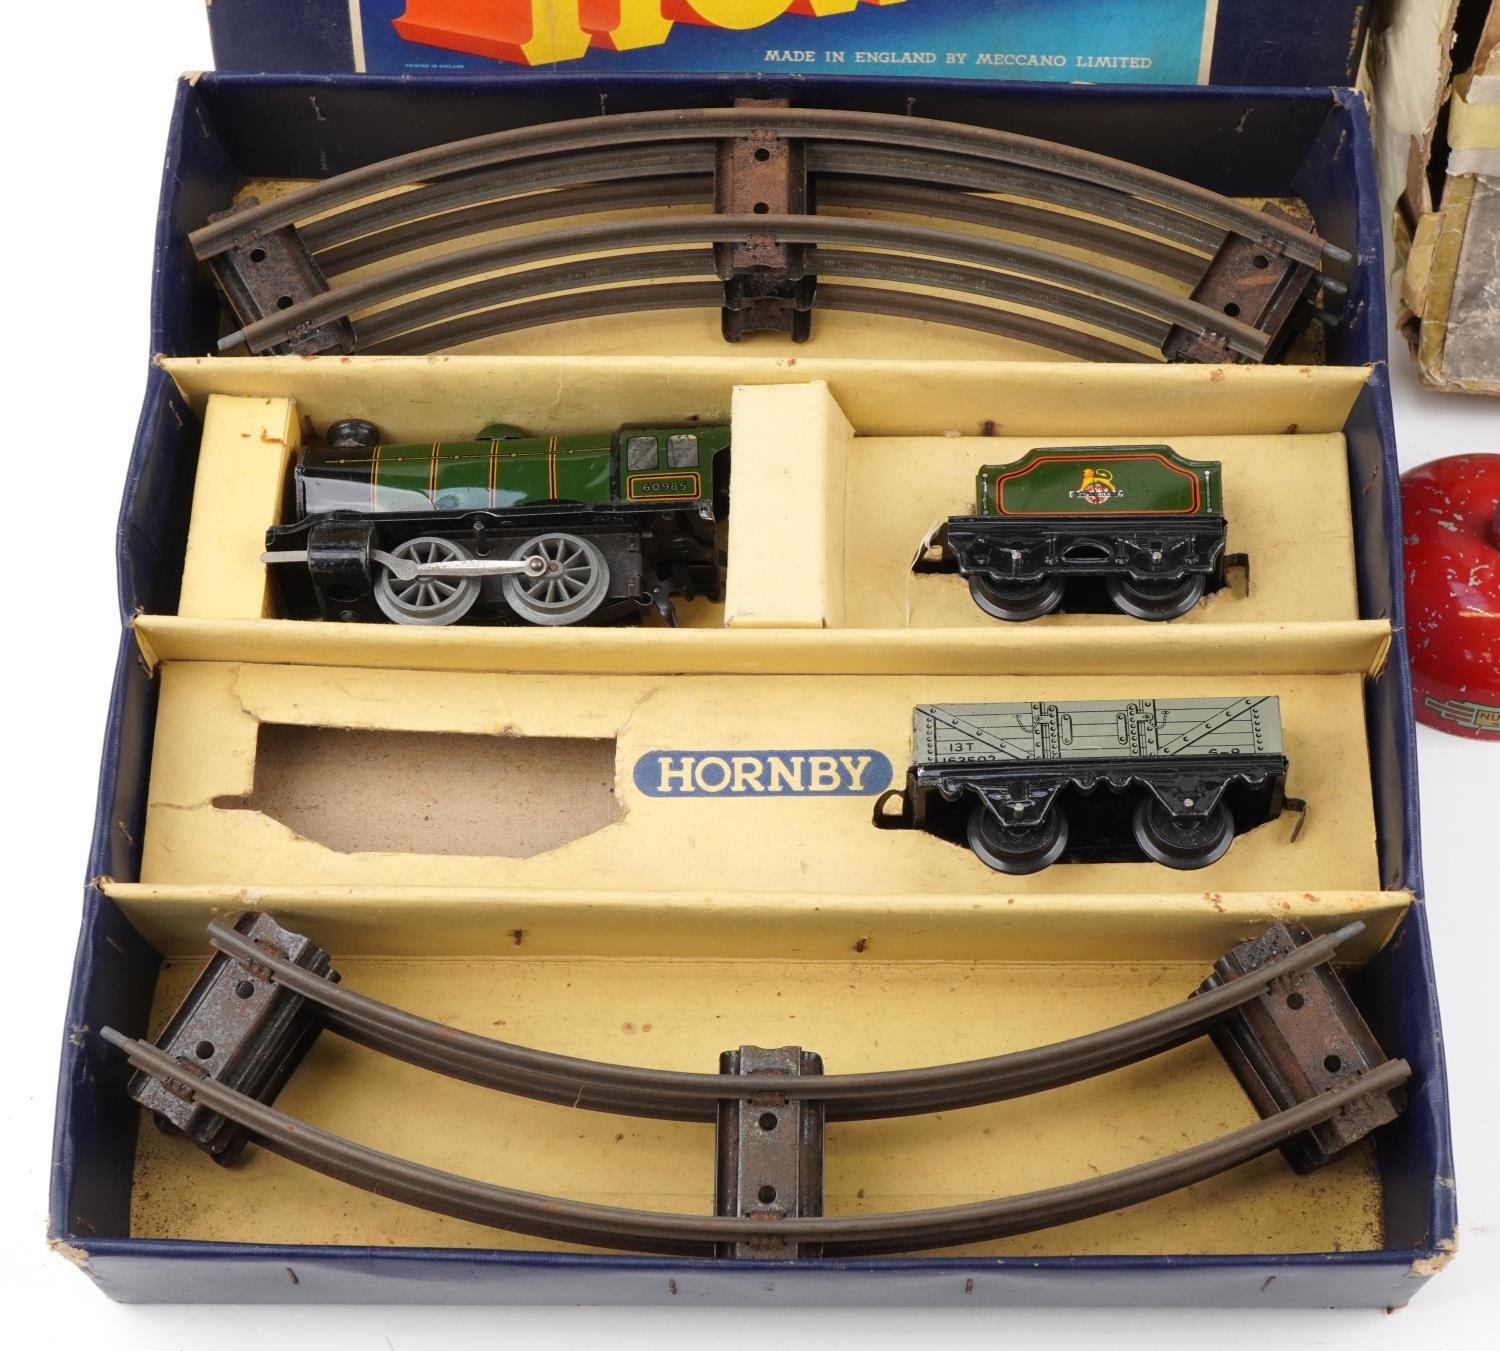 Hornby O gauge tinplate clockwork part No 20 Goods Set and an Nulli Secundus remote control - Image 2 of 3